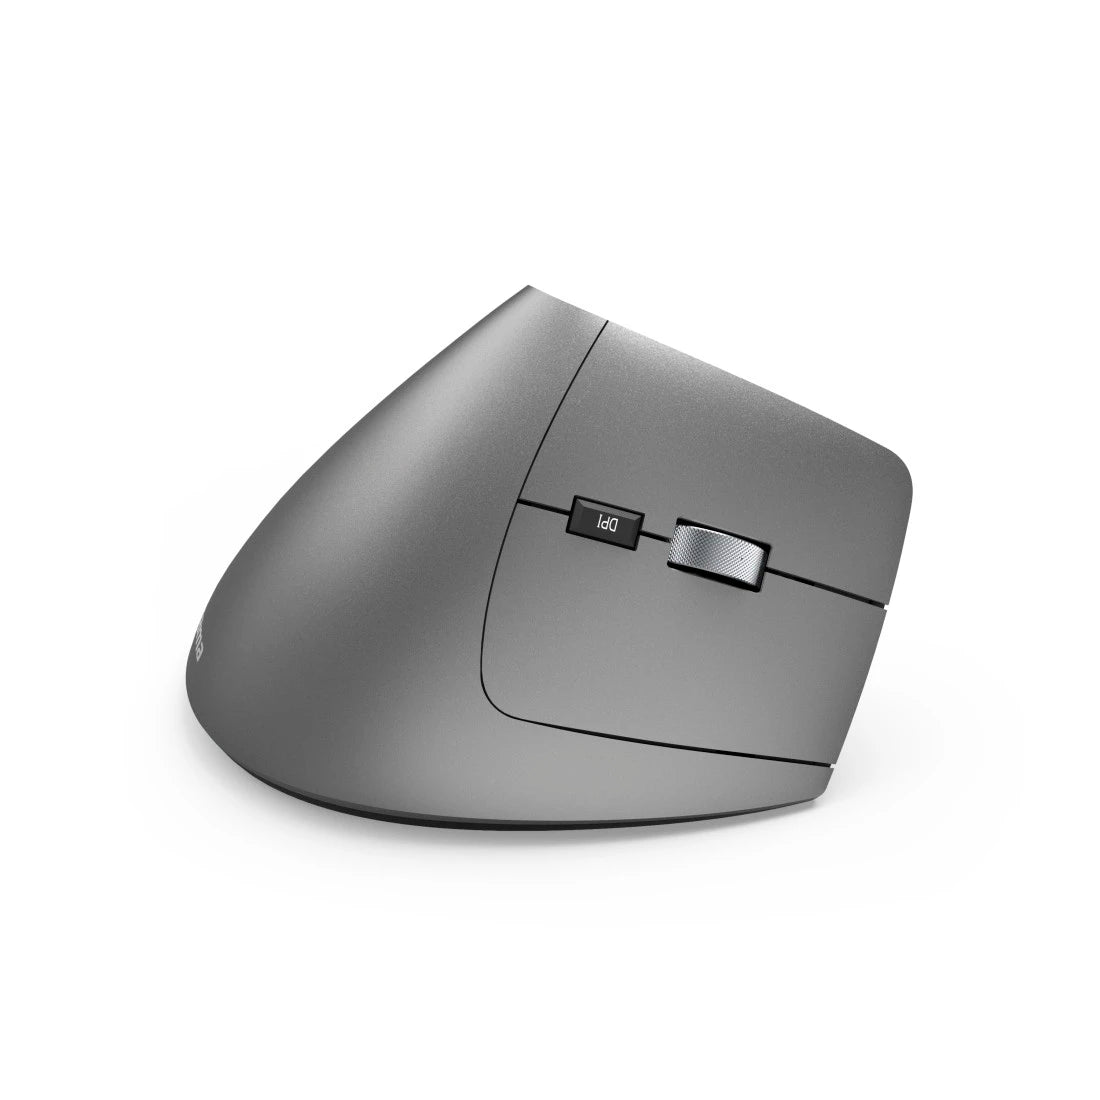 Hama EMW-700 Ergonomic Rechargeable Multi-Device Vertical Mouse - Right Handed